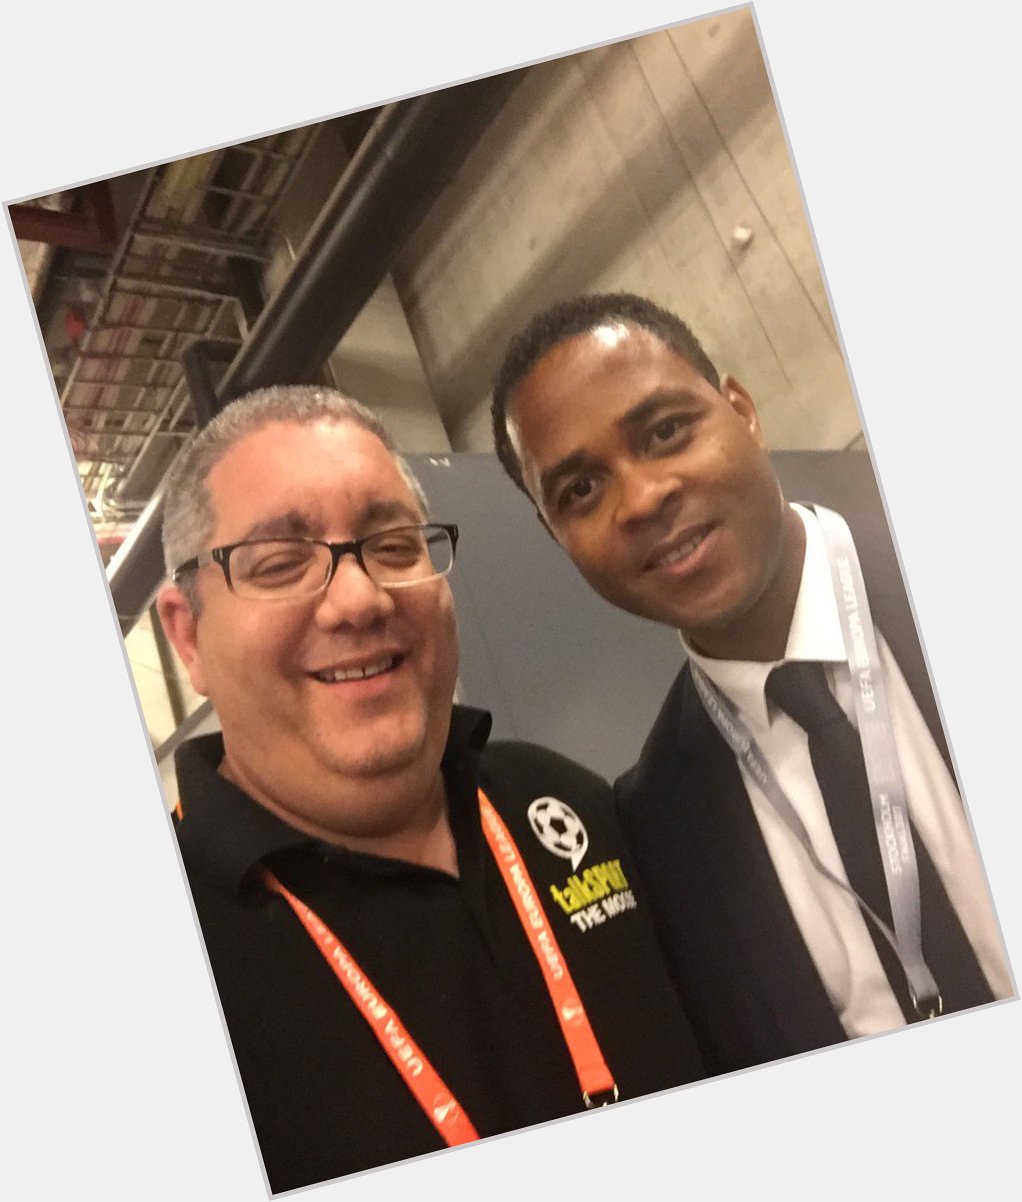 Happy 41st birthday to ex Newcastle & Holland striker Patrick Kluivert, have a great day my friend 